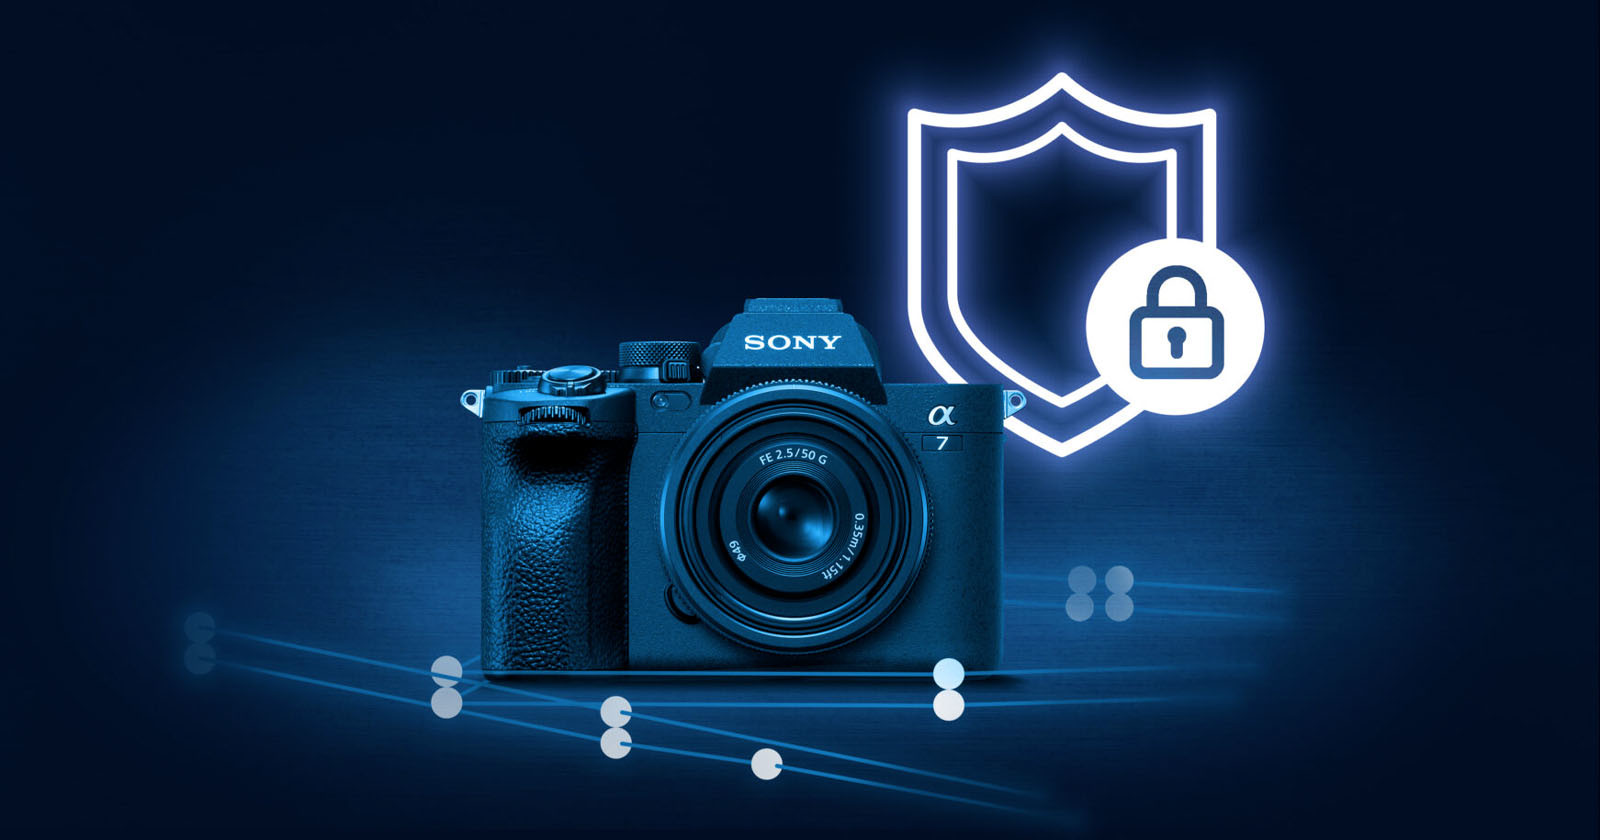 Sonys Forgery-Proof Tech Adds Crypto Signature to Photos In-Camera